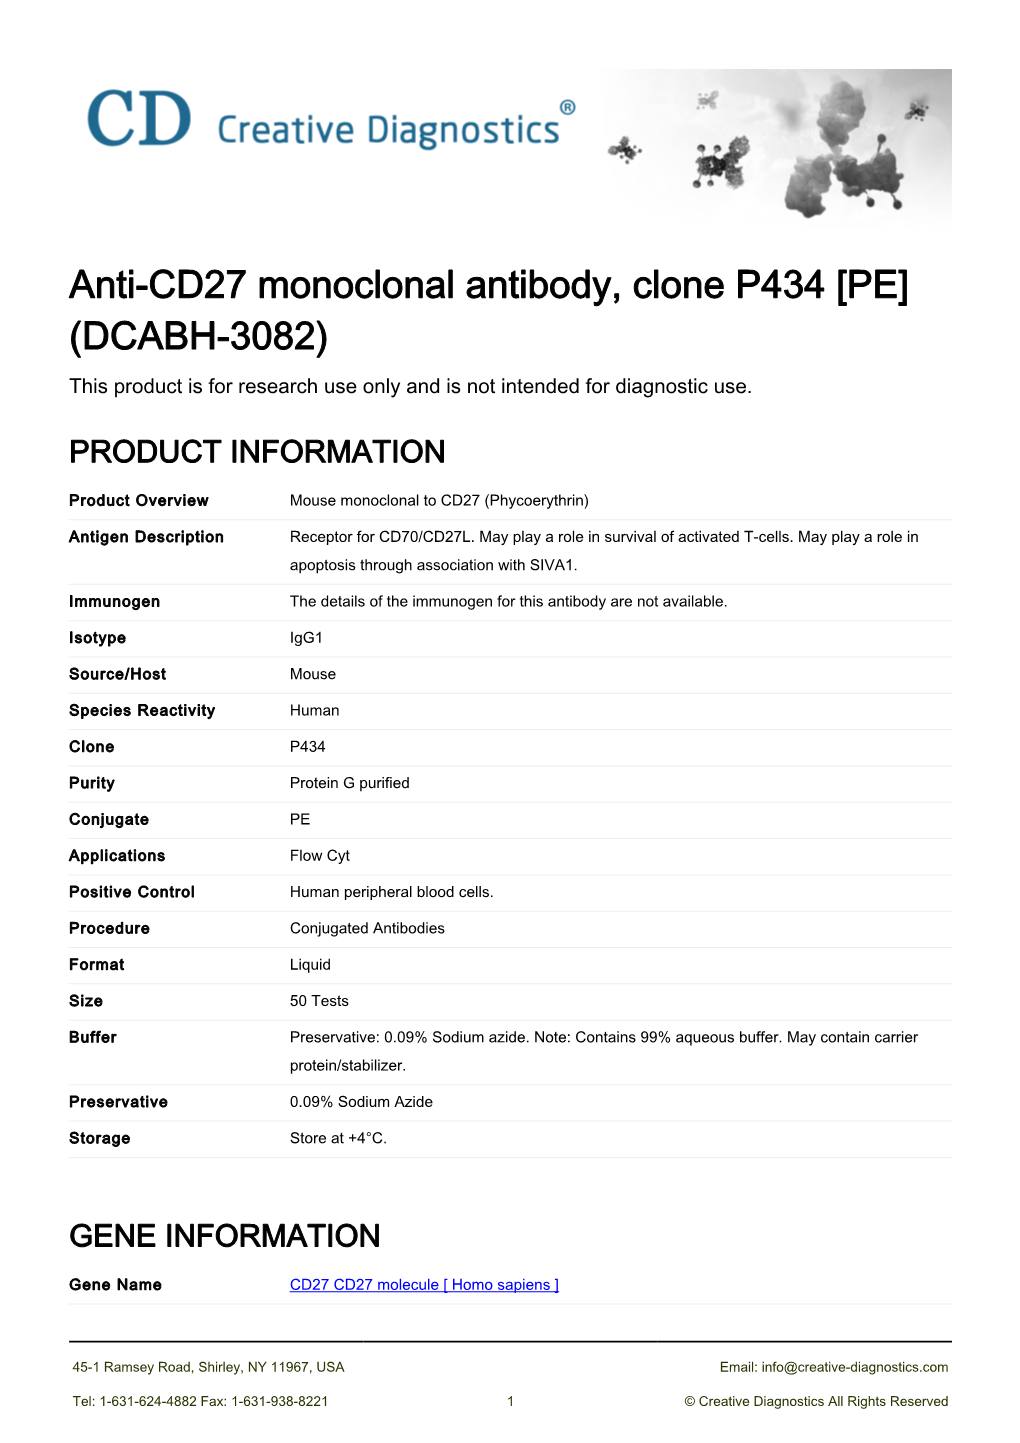 Anti-CD27 Monoclonal Antibody, Clone P434 [PE] (DCABH-3082) This Product Is for Research Use Only and Is Not Intended for Diagnostic Use